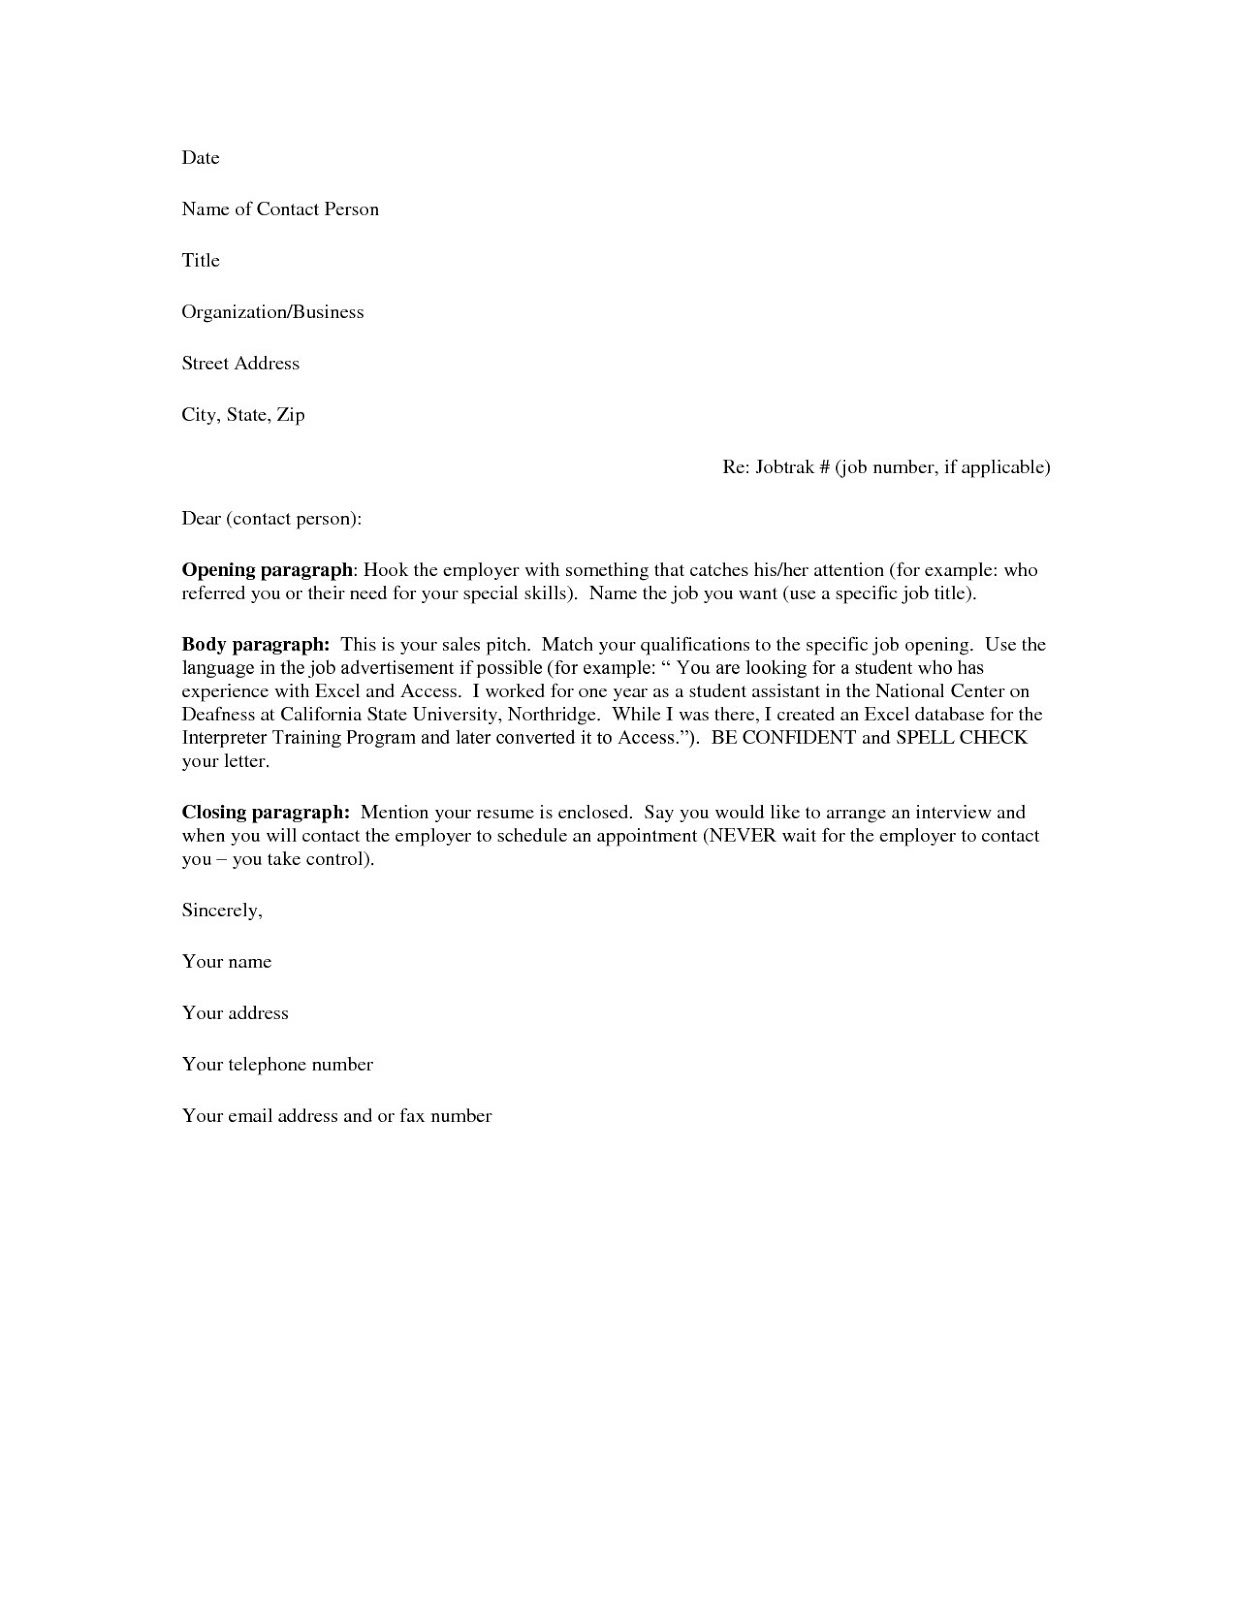 Cover letter template free